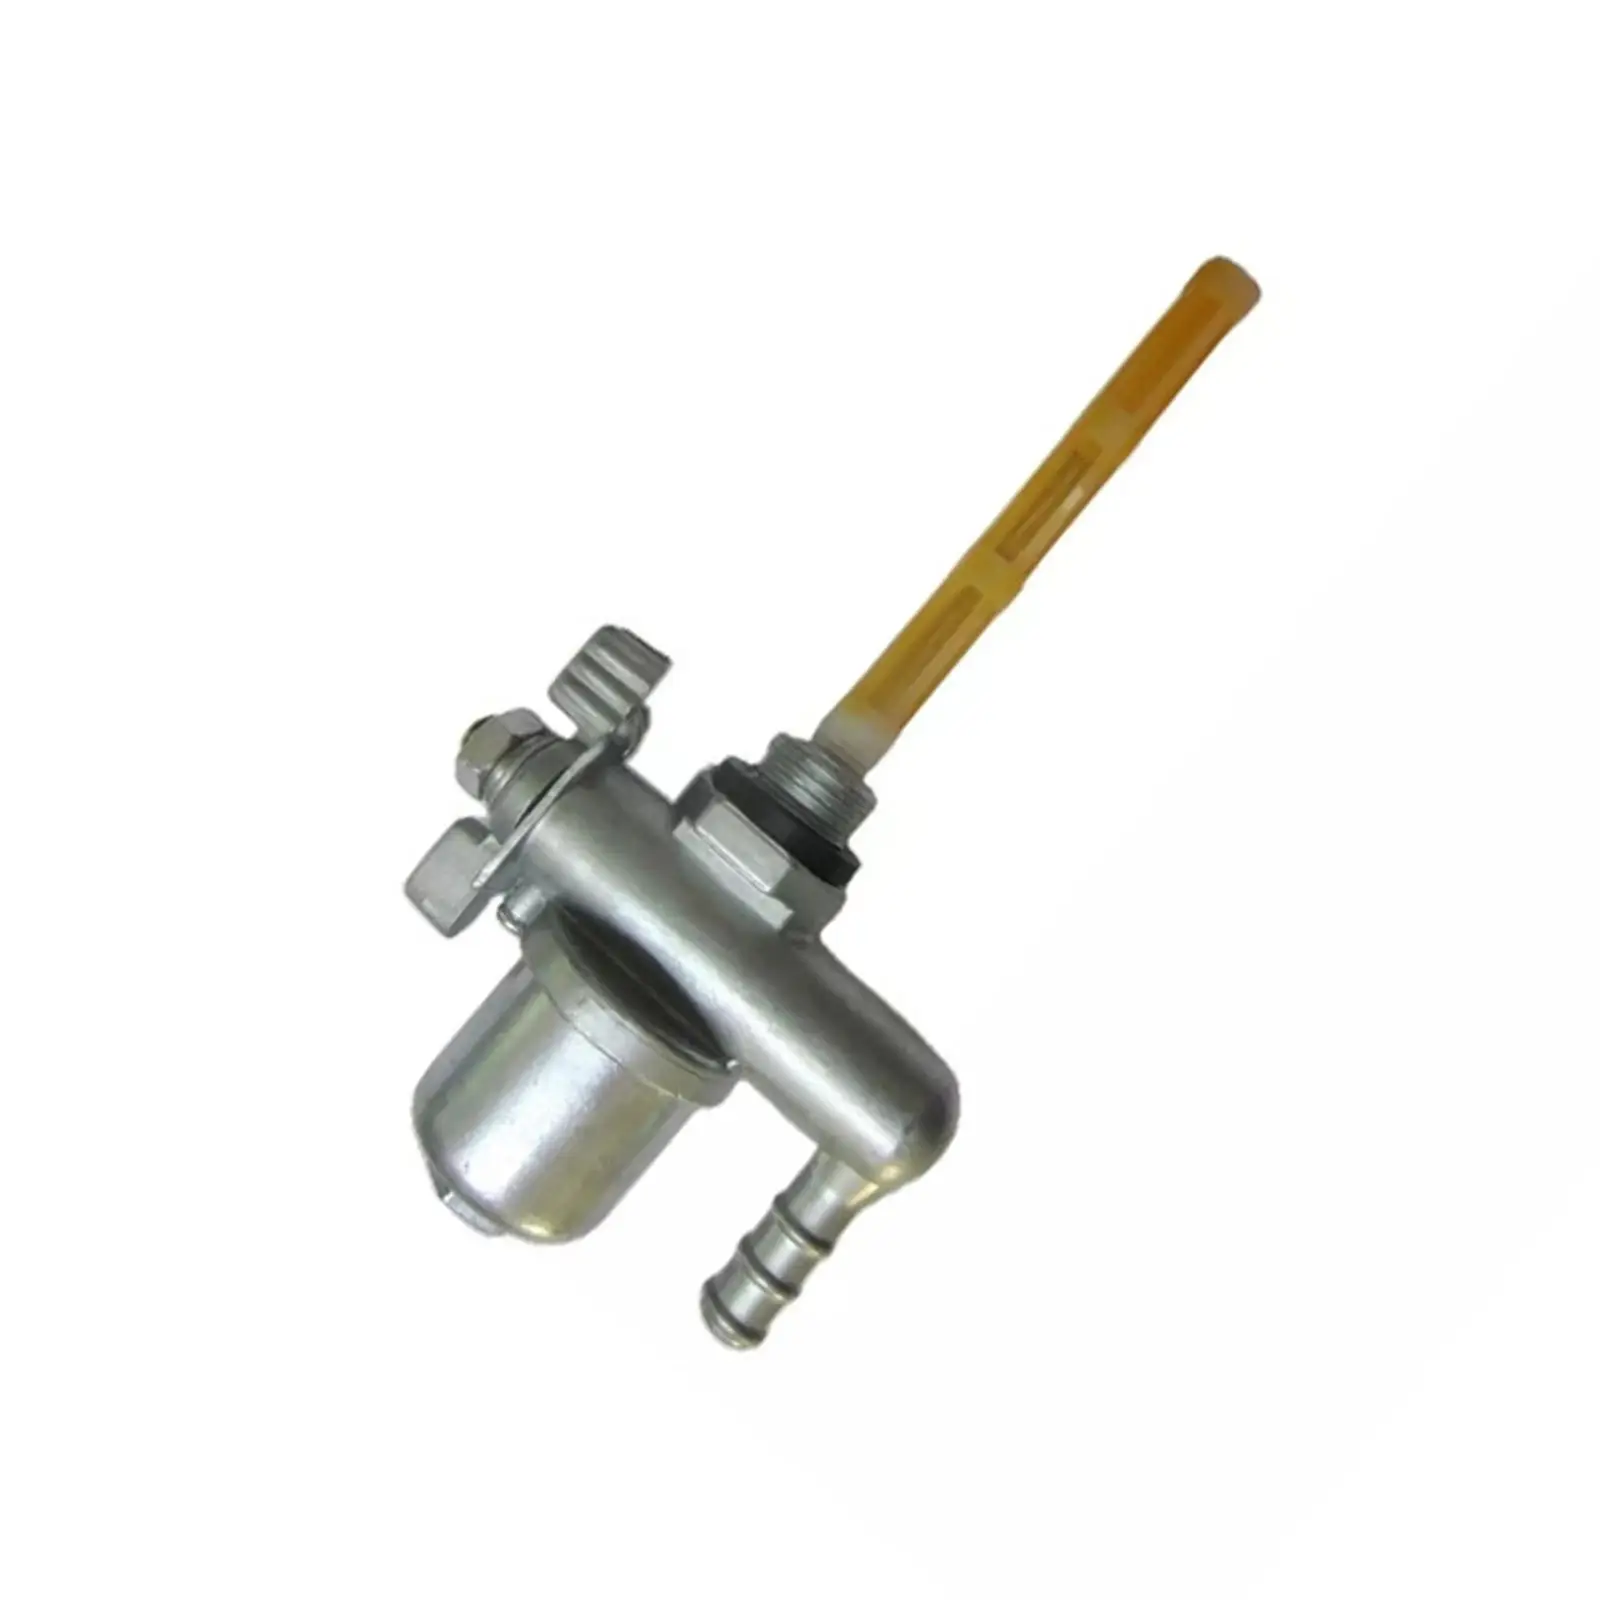 Motorcycle Fuel Gas Petcock Valve Switch Replacement for Ruassia Msk Motorcycle Parts Supplies Durable Premium